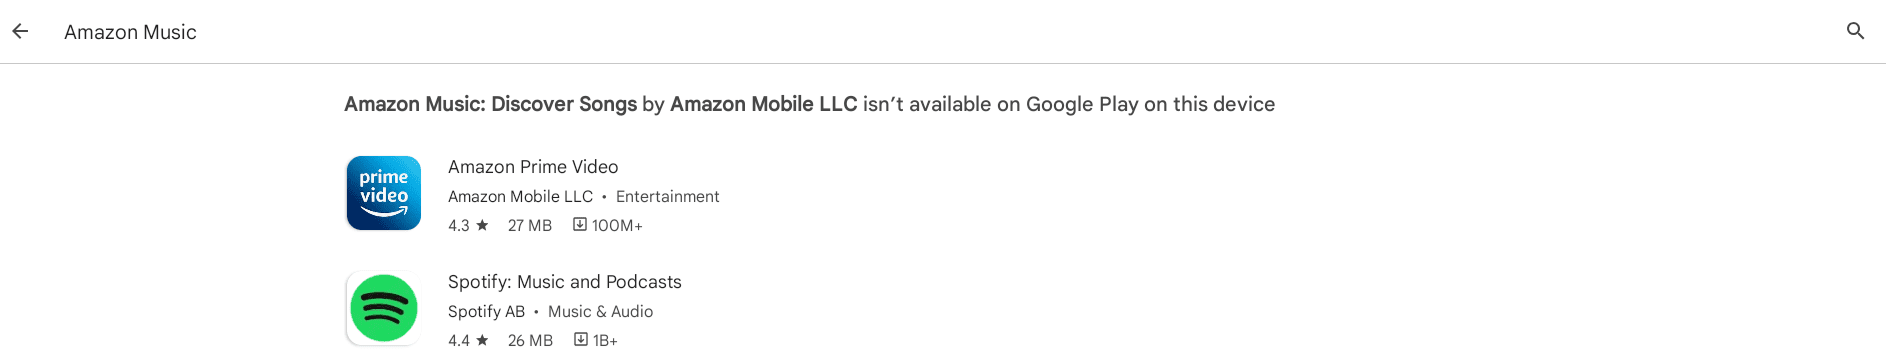 Unavailability of Amazon Music on the Chrome OS Google Play Store